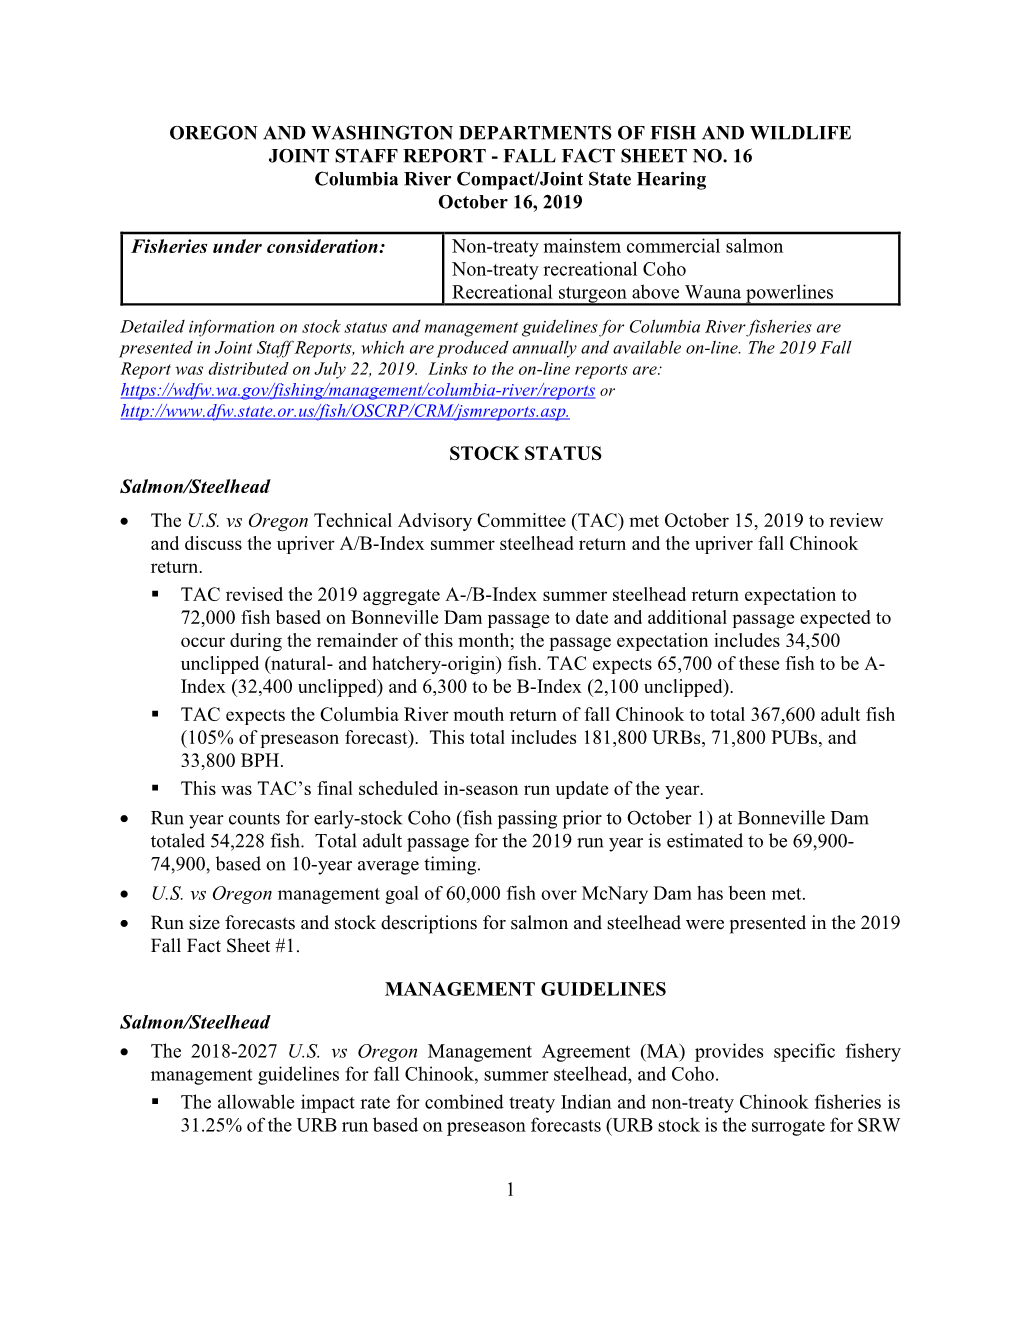 FALL FACT SHEET NO. 16 Columbia River Compact/Joint State Hearing October 16, 2019